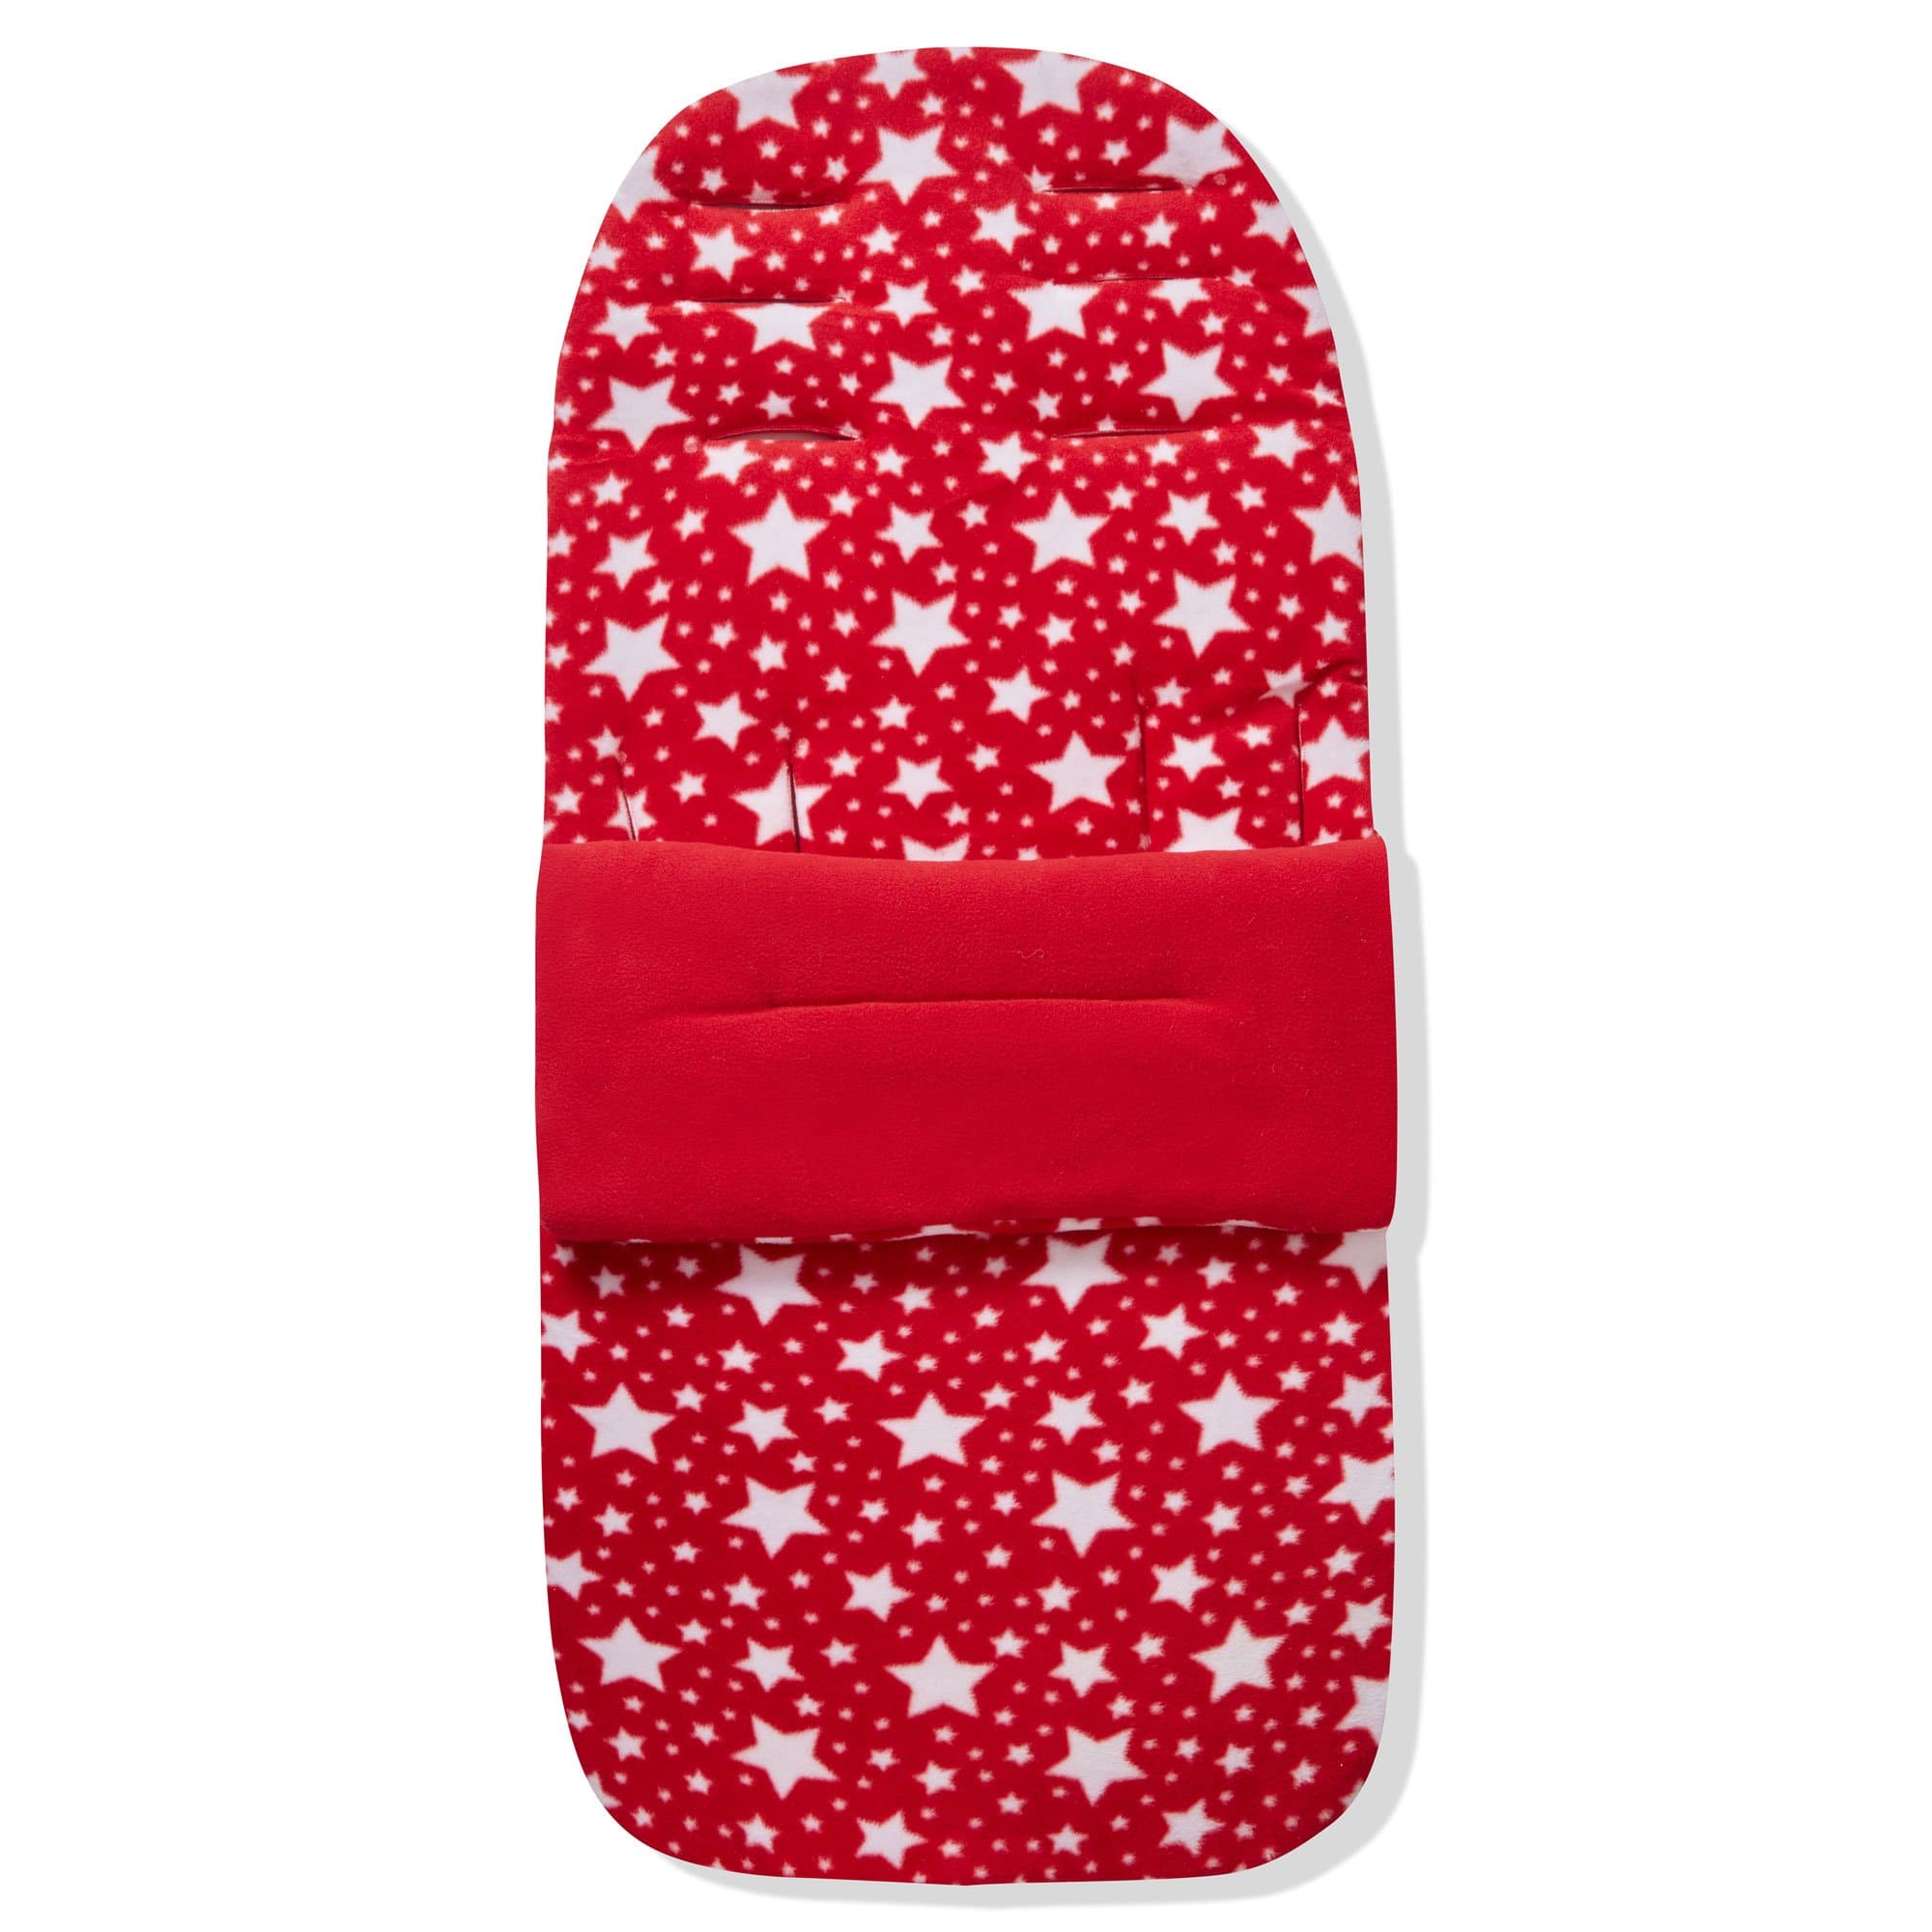 Fleece Footmuff / Cosy Toes Compatible with Quinny - Red Star / Fits All Models | For Your Little One